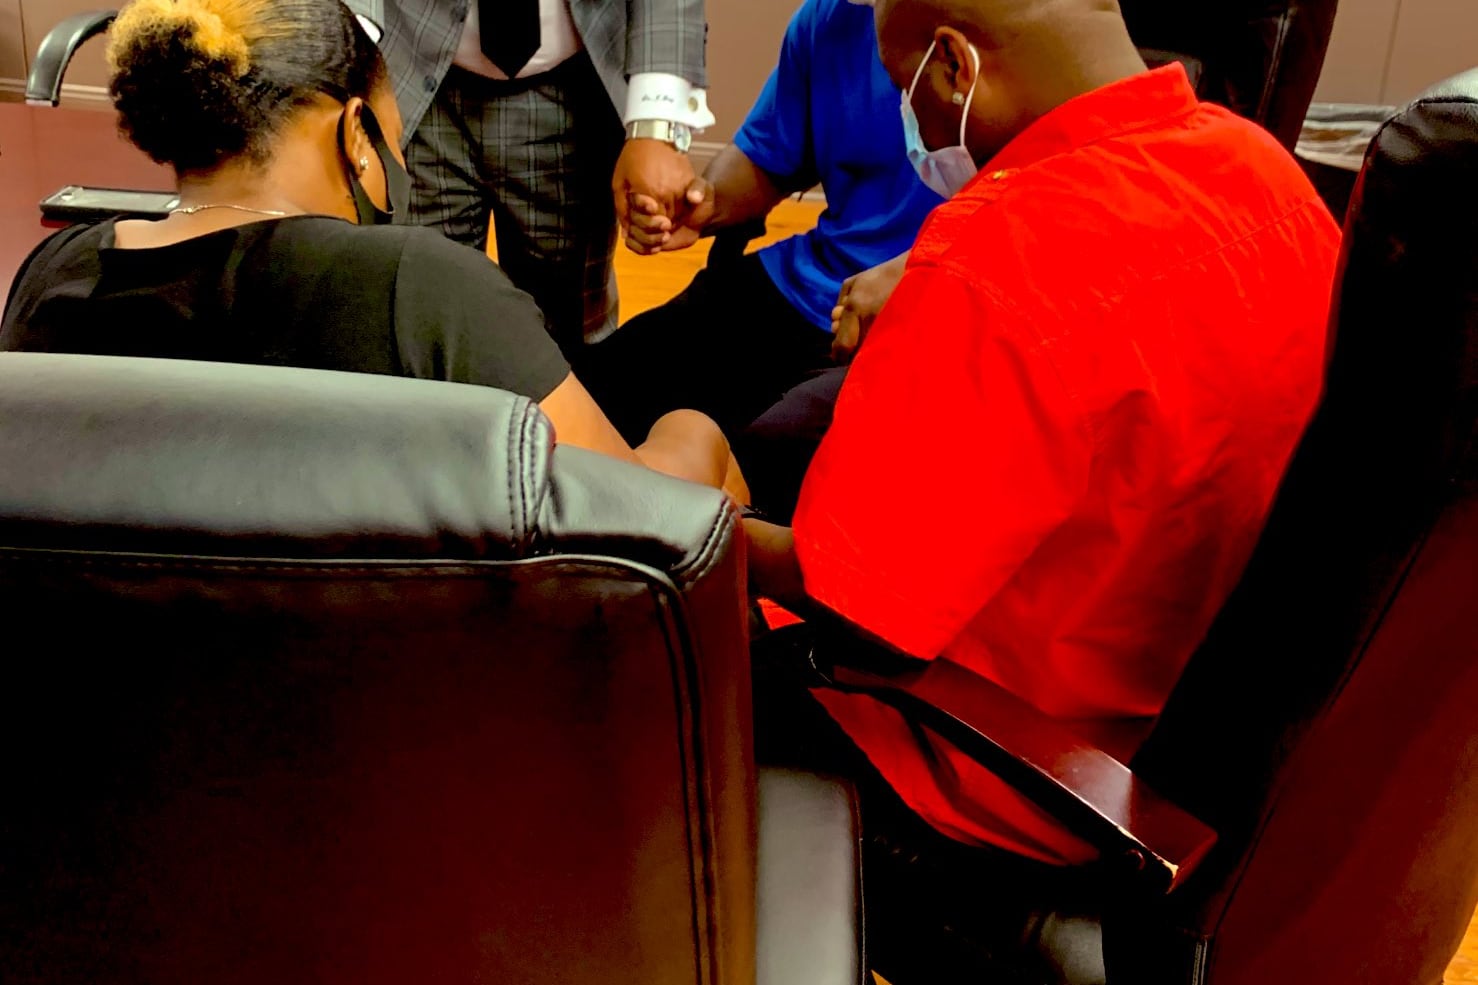 Four adults circled together in a conference room hold hands and pray.